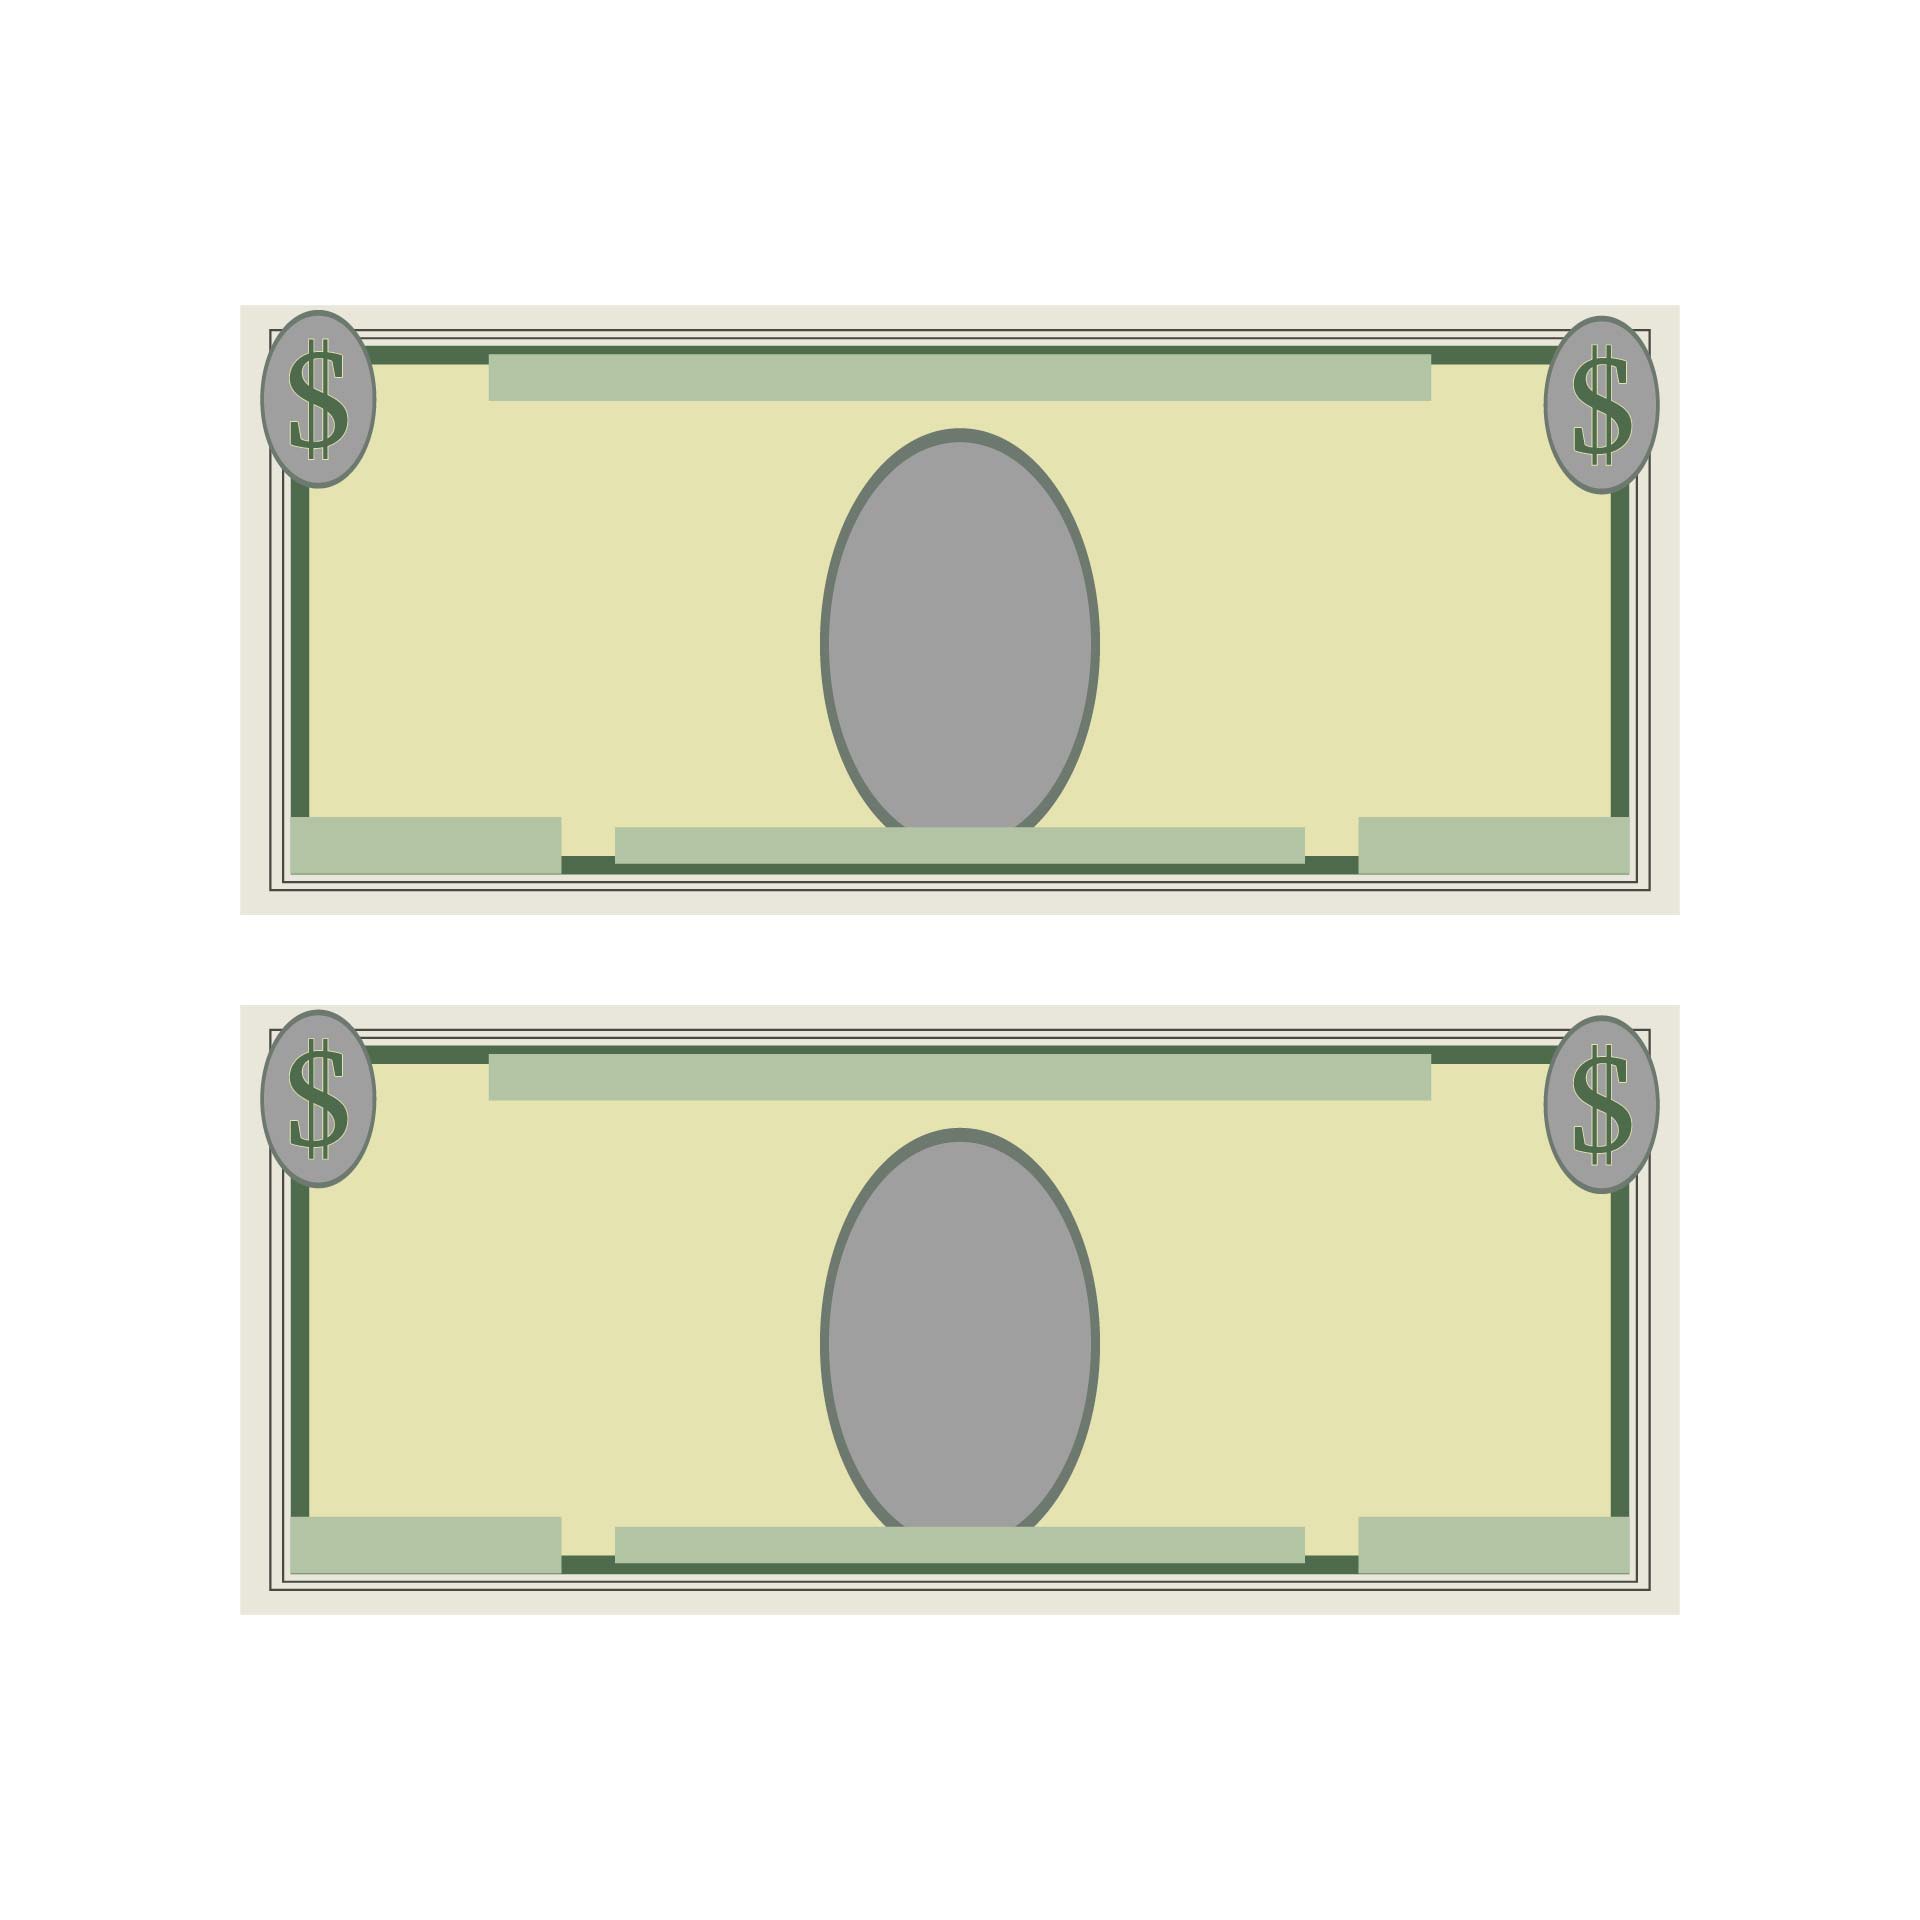 8 Best Images of Fake Play Money Printable Free Printable Play Money